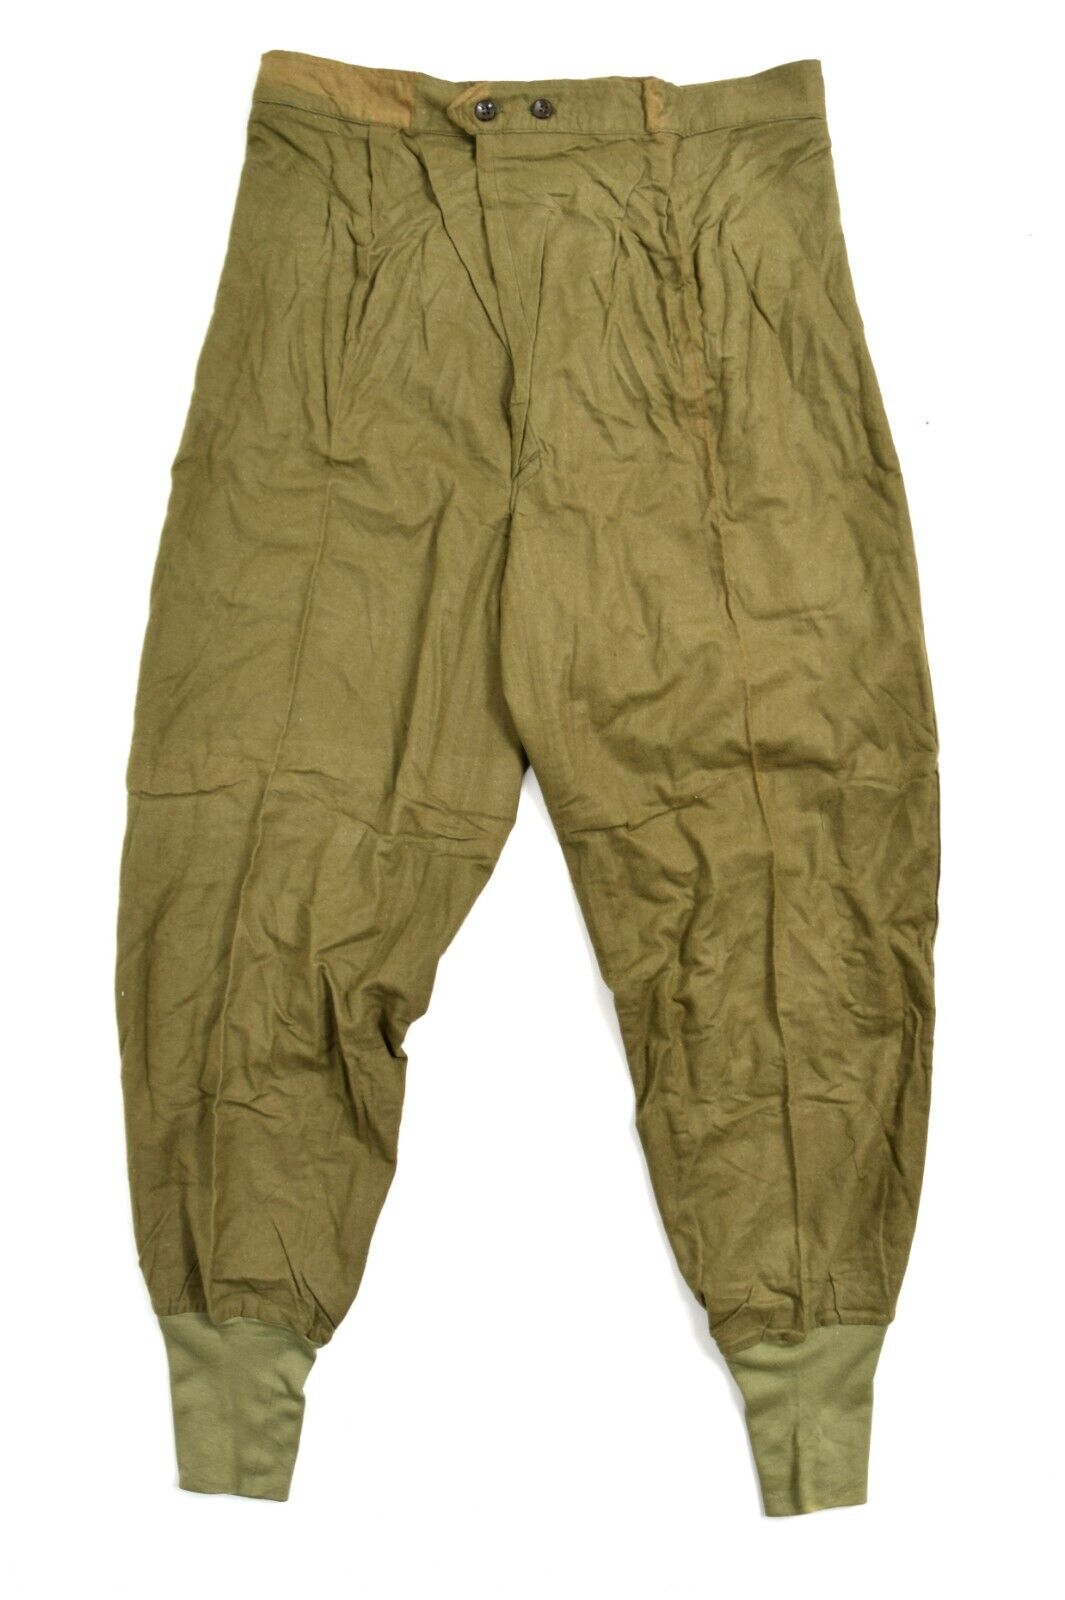 Only Army Surplus Tactical Outdoor Military Clothing & Equipment